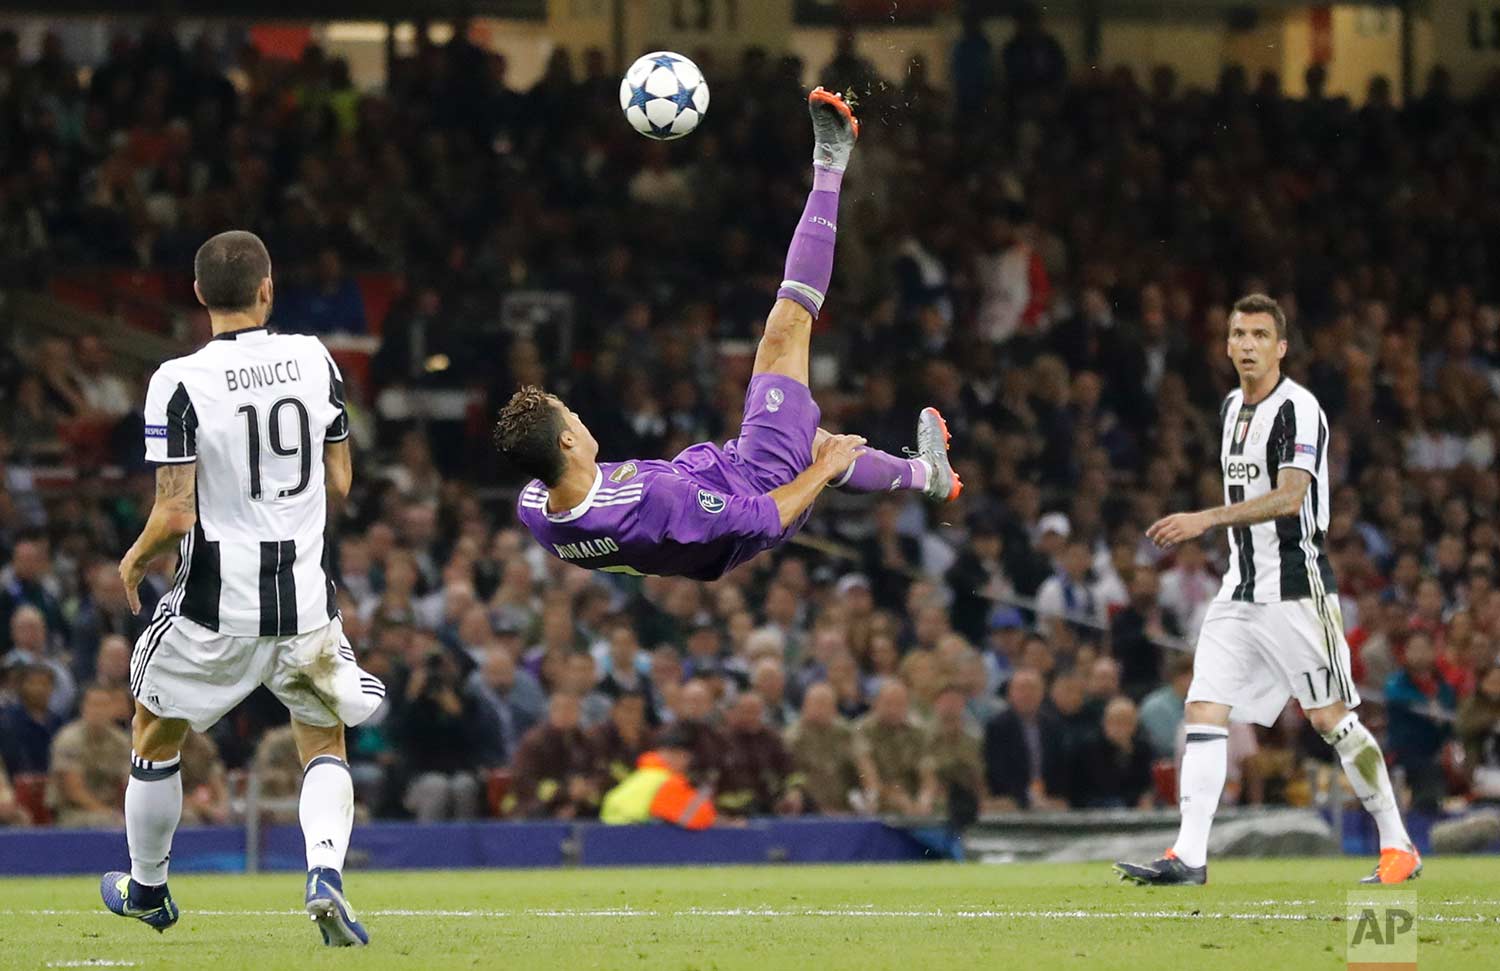  In this Saturday June 3, 2017 photo, Real Madrid's Cristiano Ronaldo connects with an overhead kick during the Champions League final soccer match between Juventus and Real Madrid at the Millennium stadium in Cardiff, Wales. (AP Photo/Frank Augstein